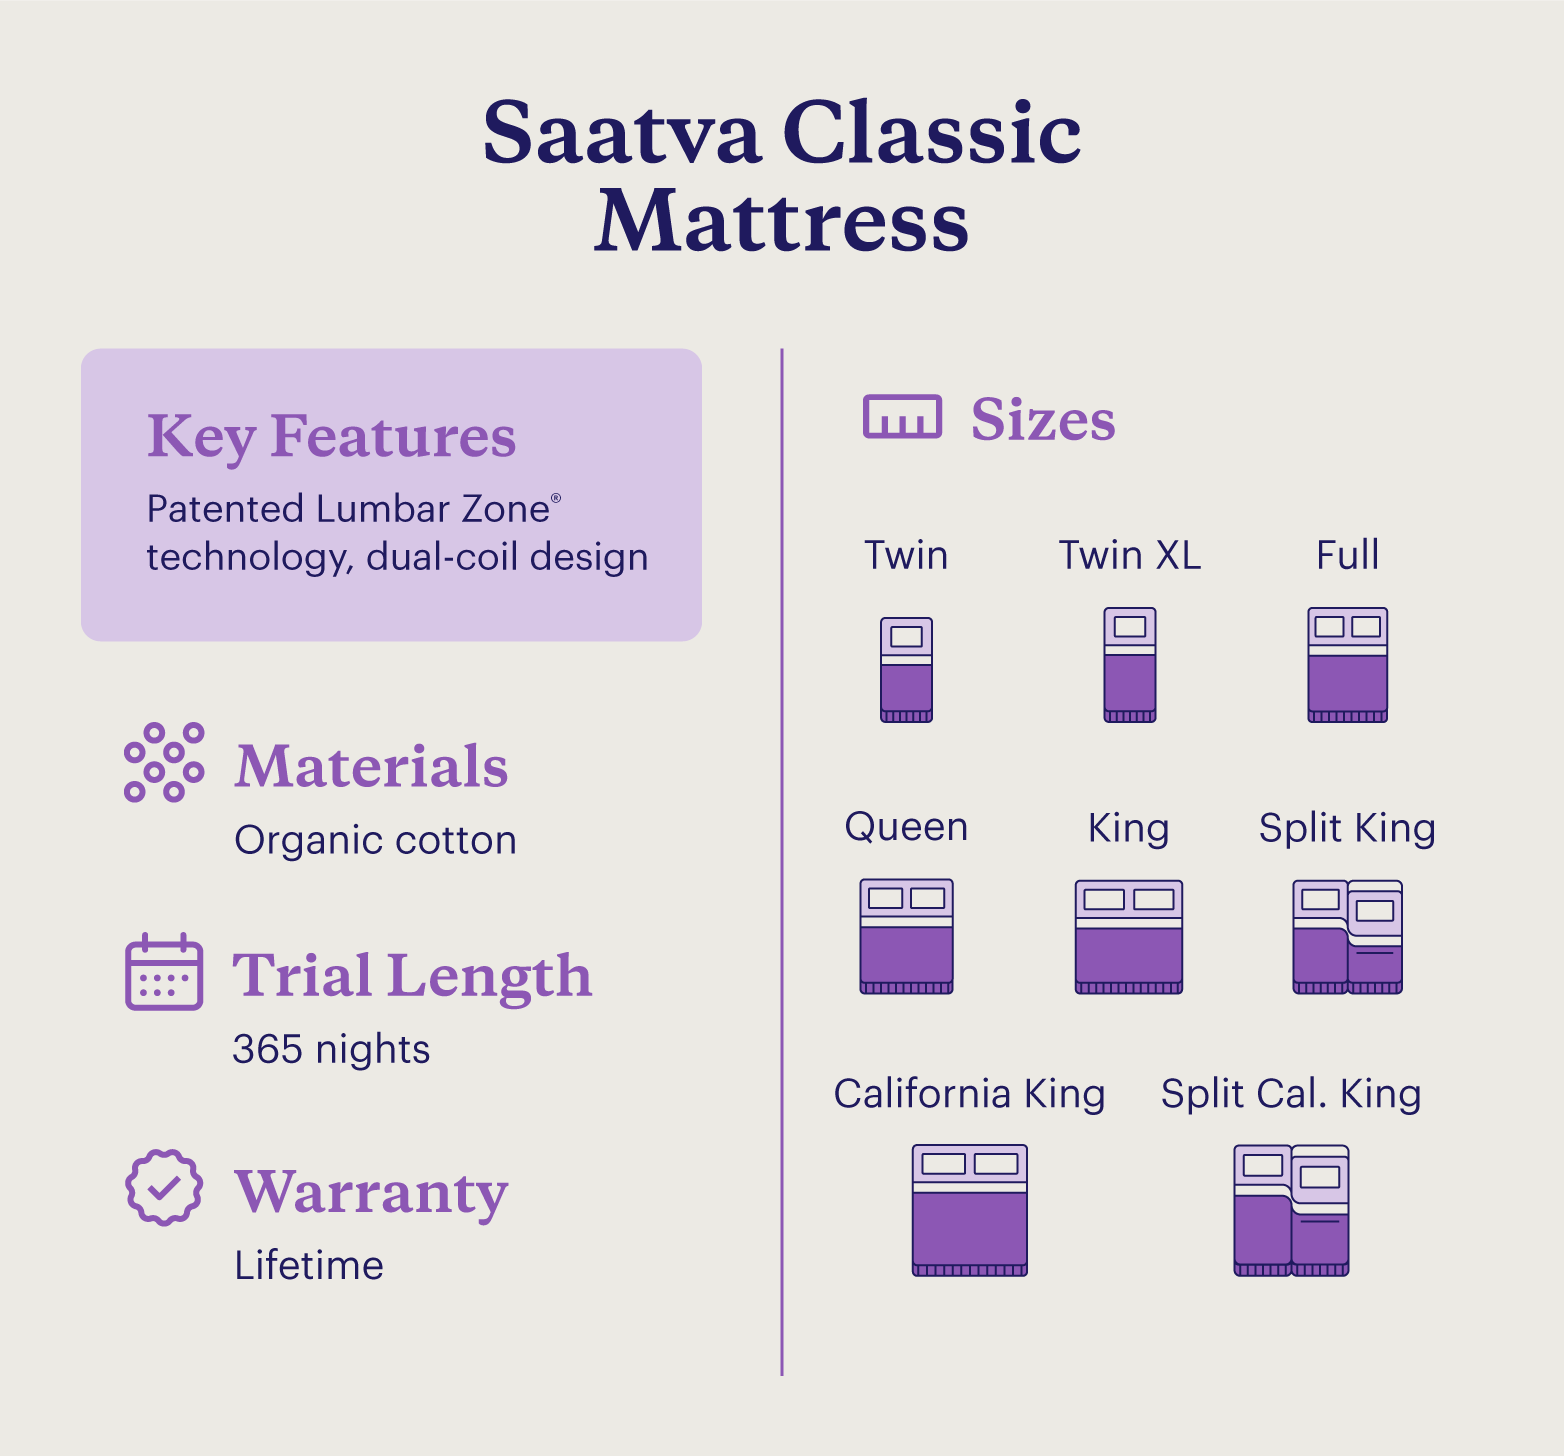 A chart showing information about the Saatva Classic Mattress.